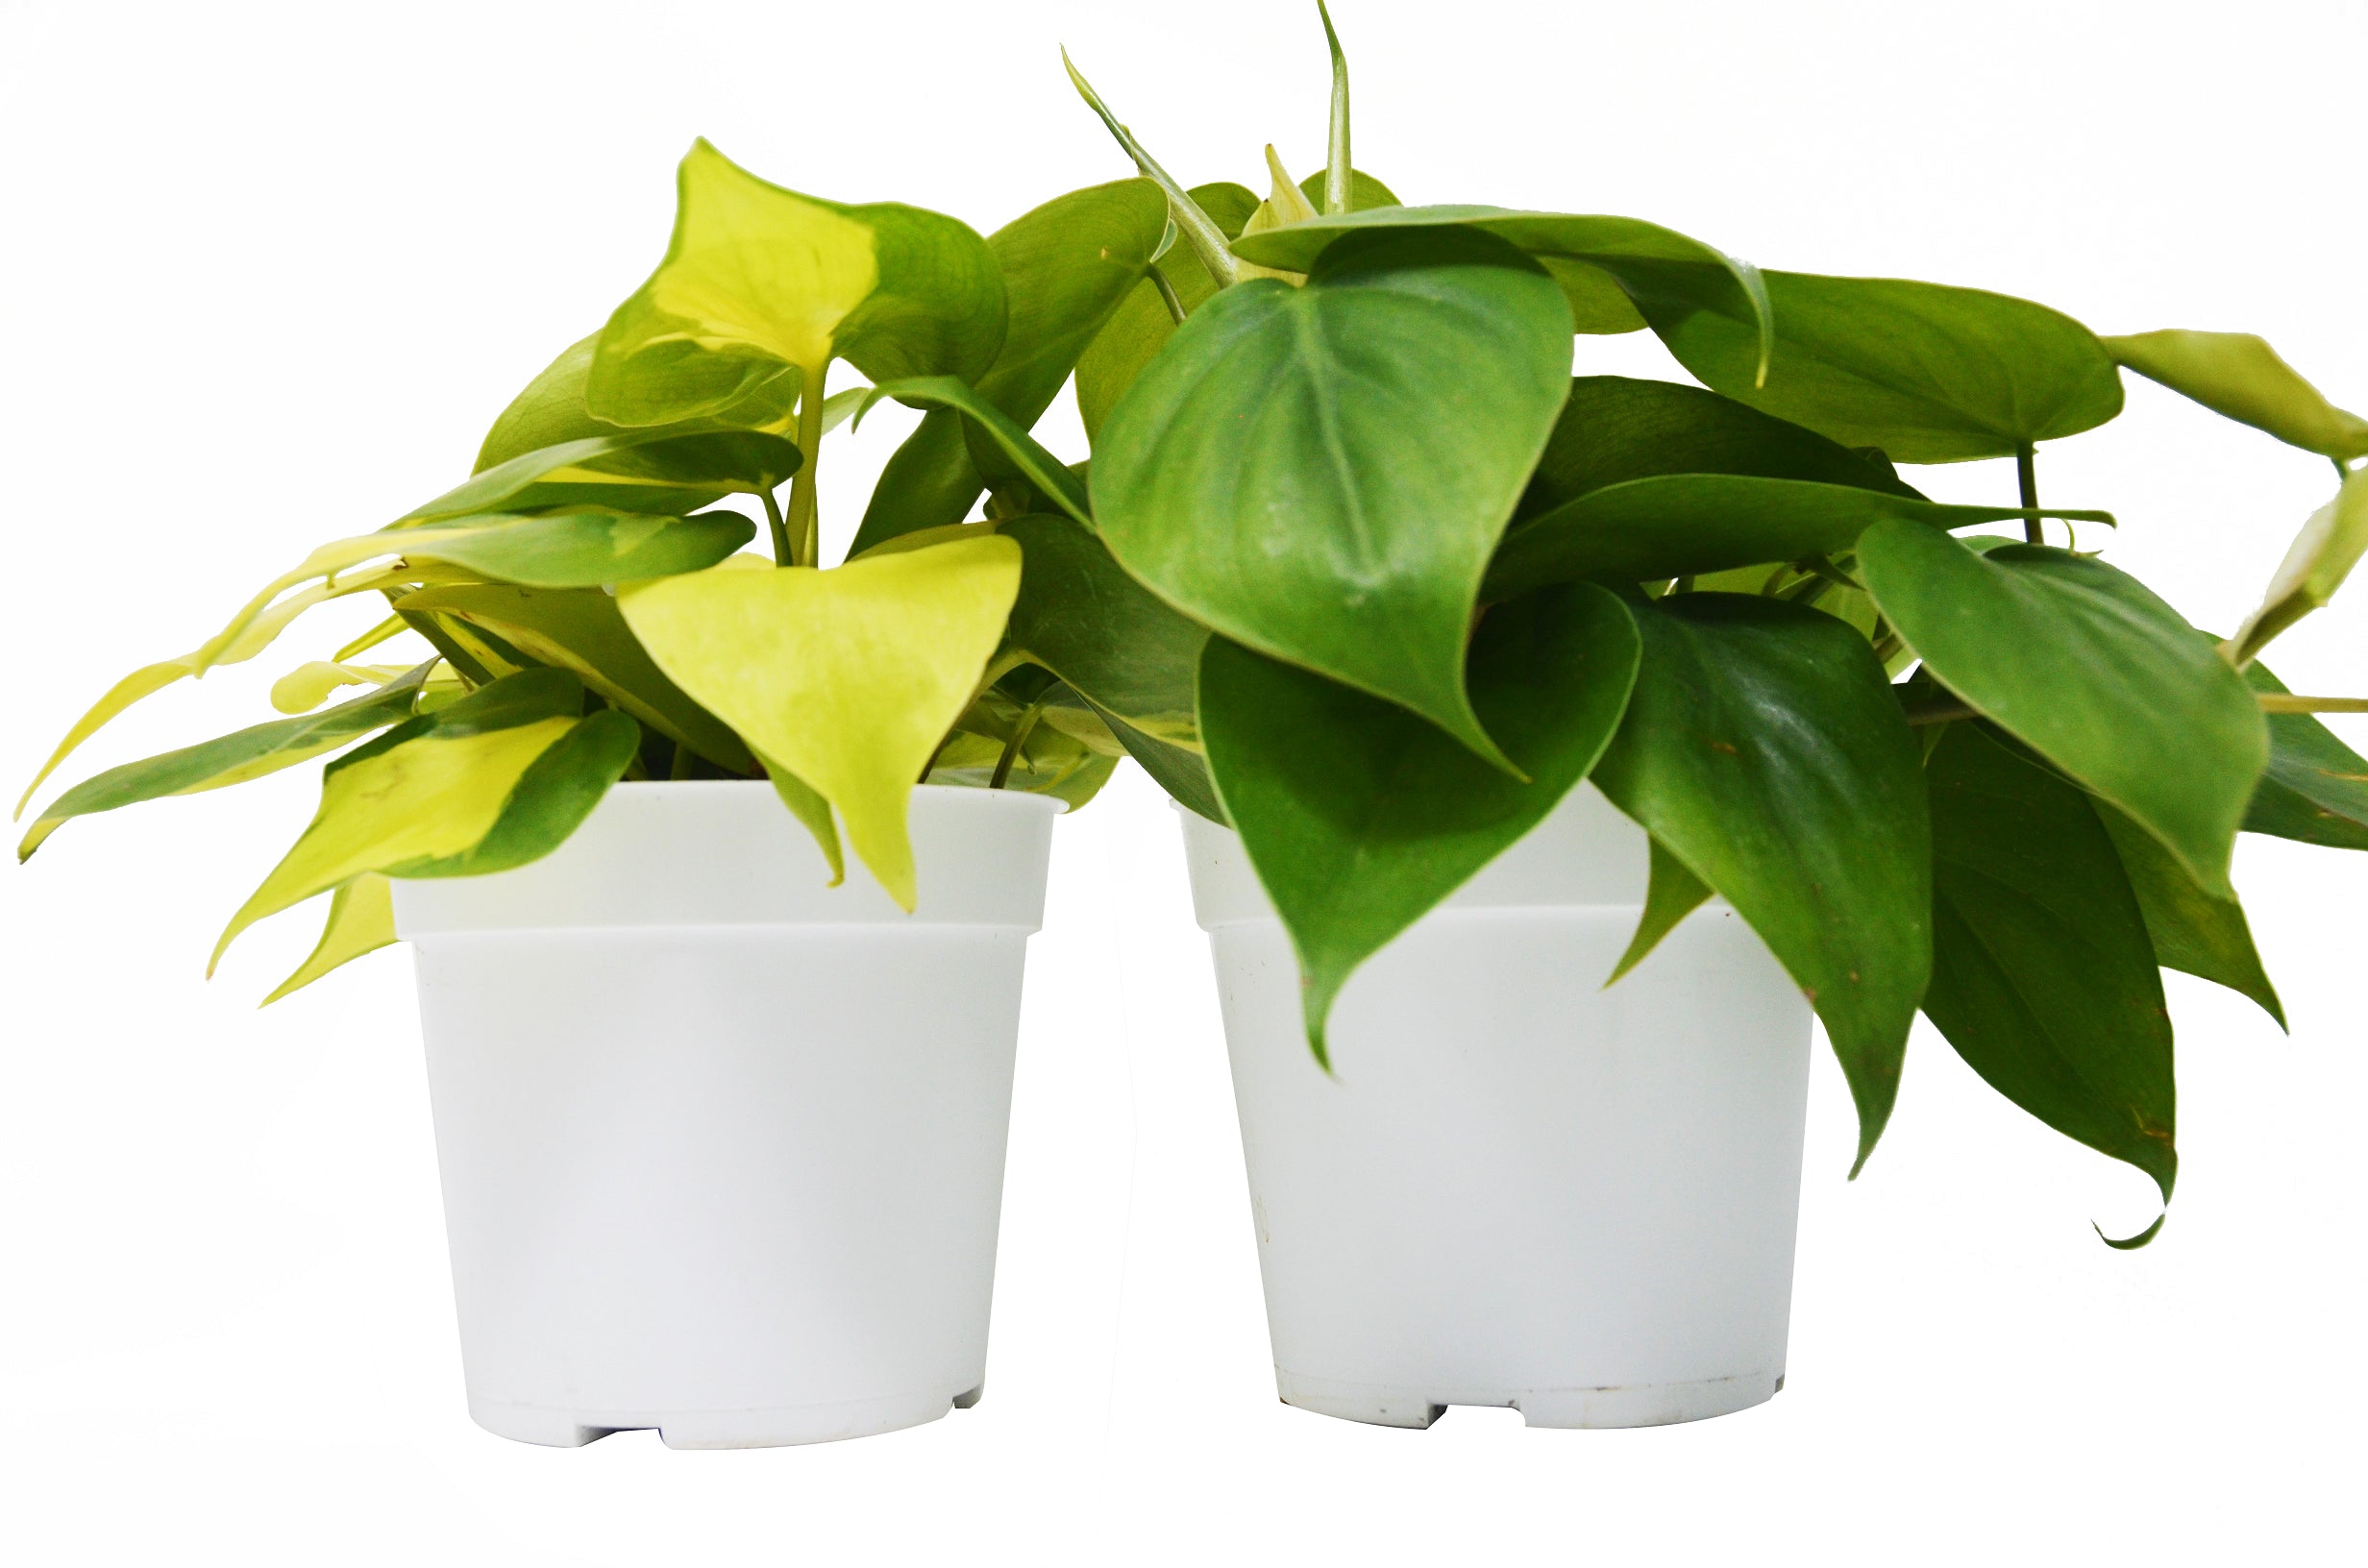 Two plants on a white background.